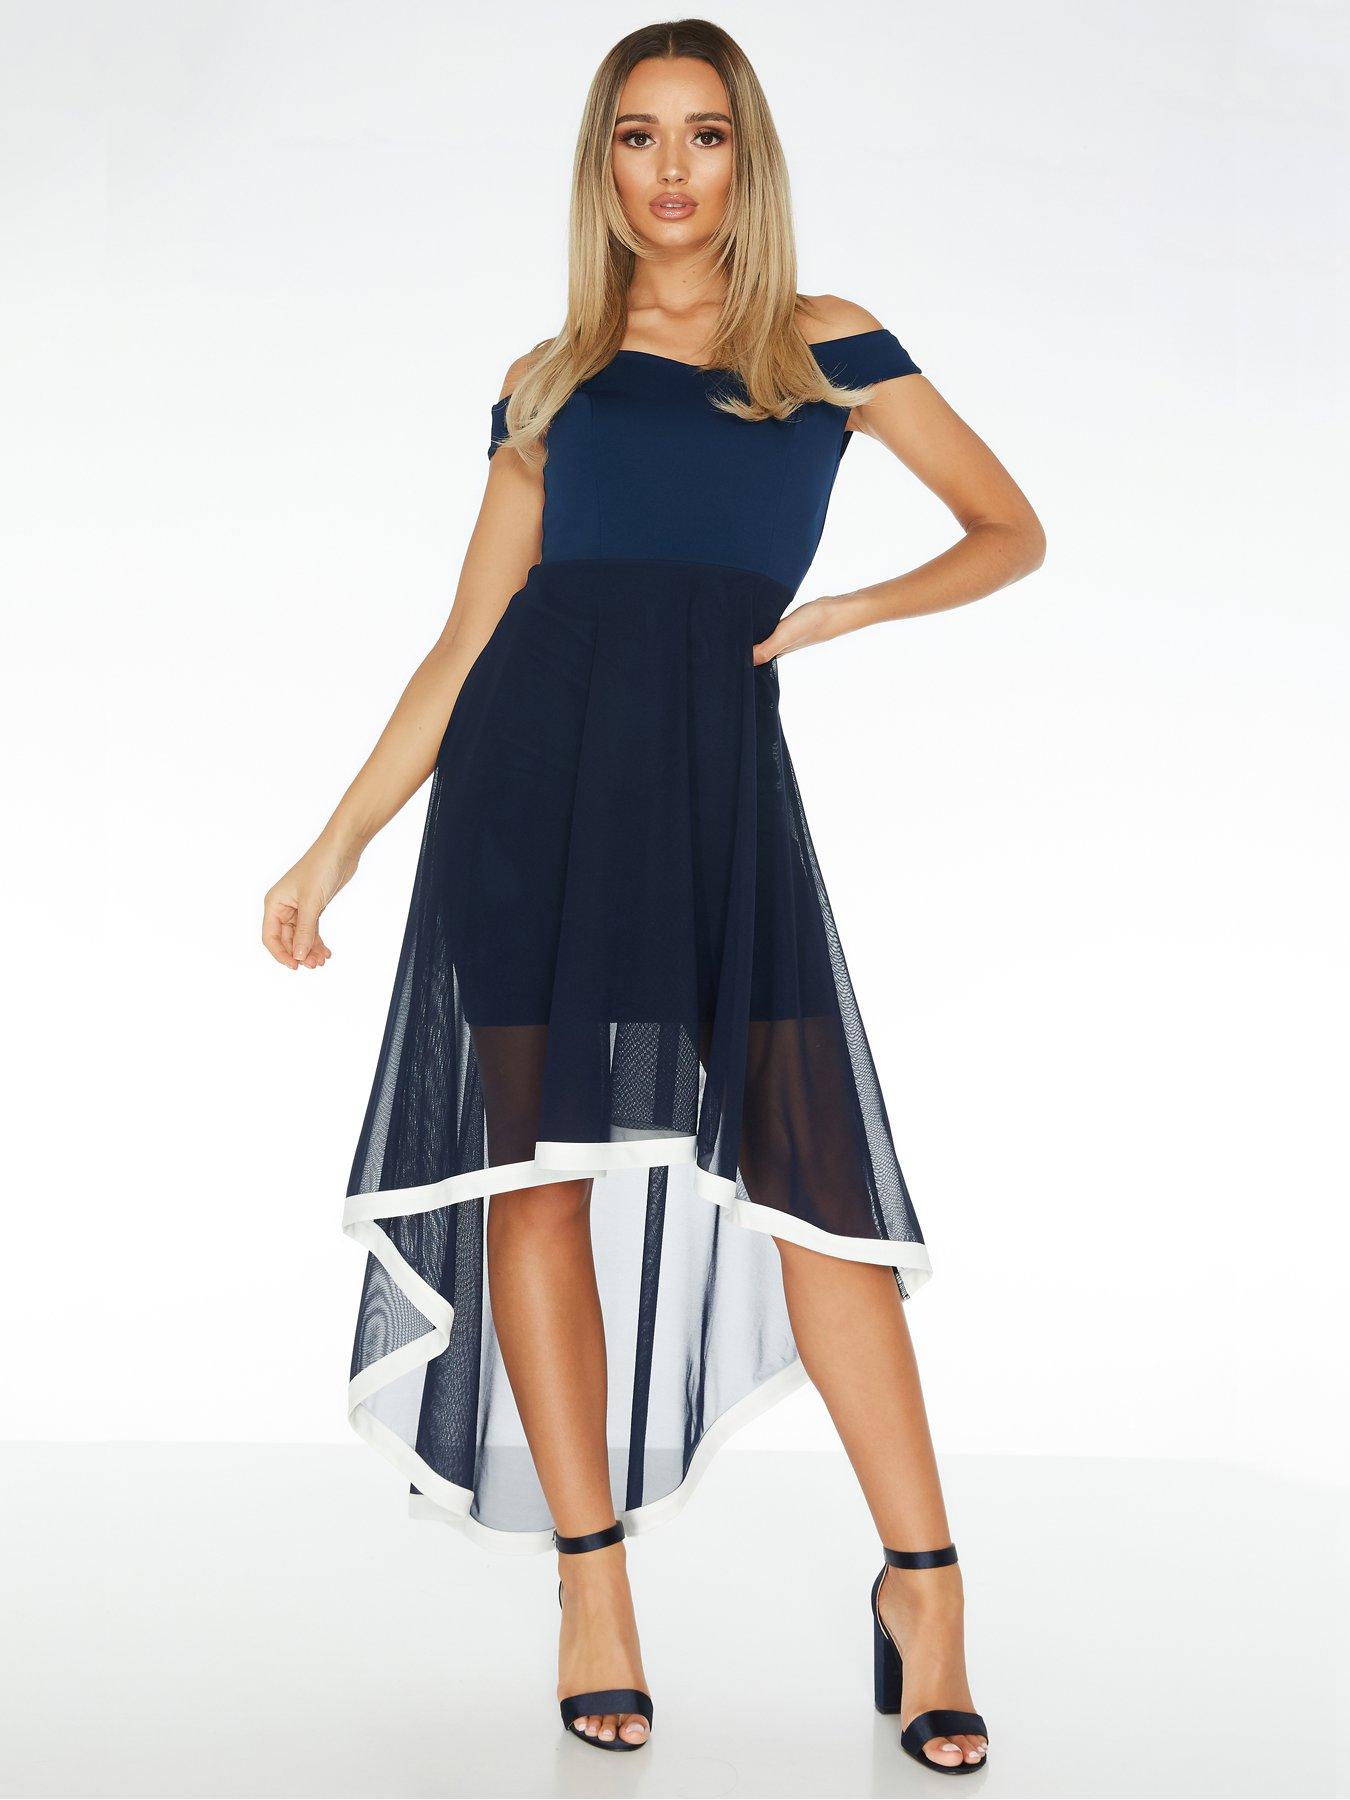 quiz navy and silver lace dip hem dress